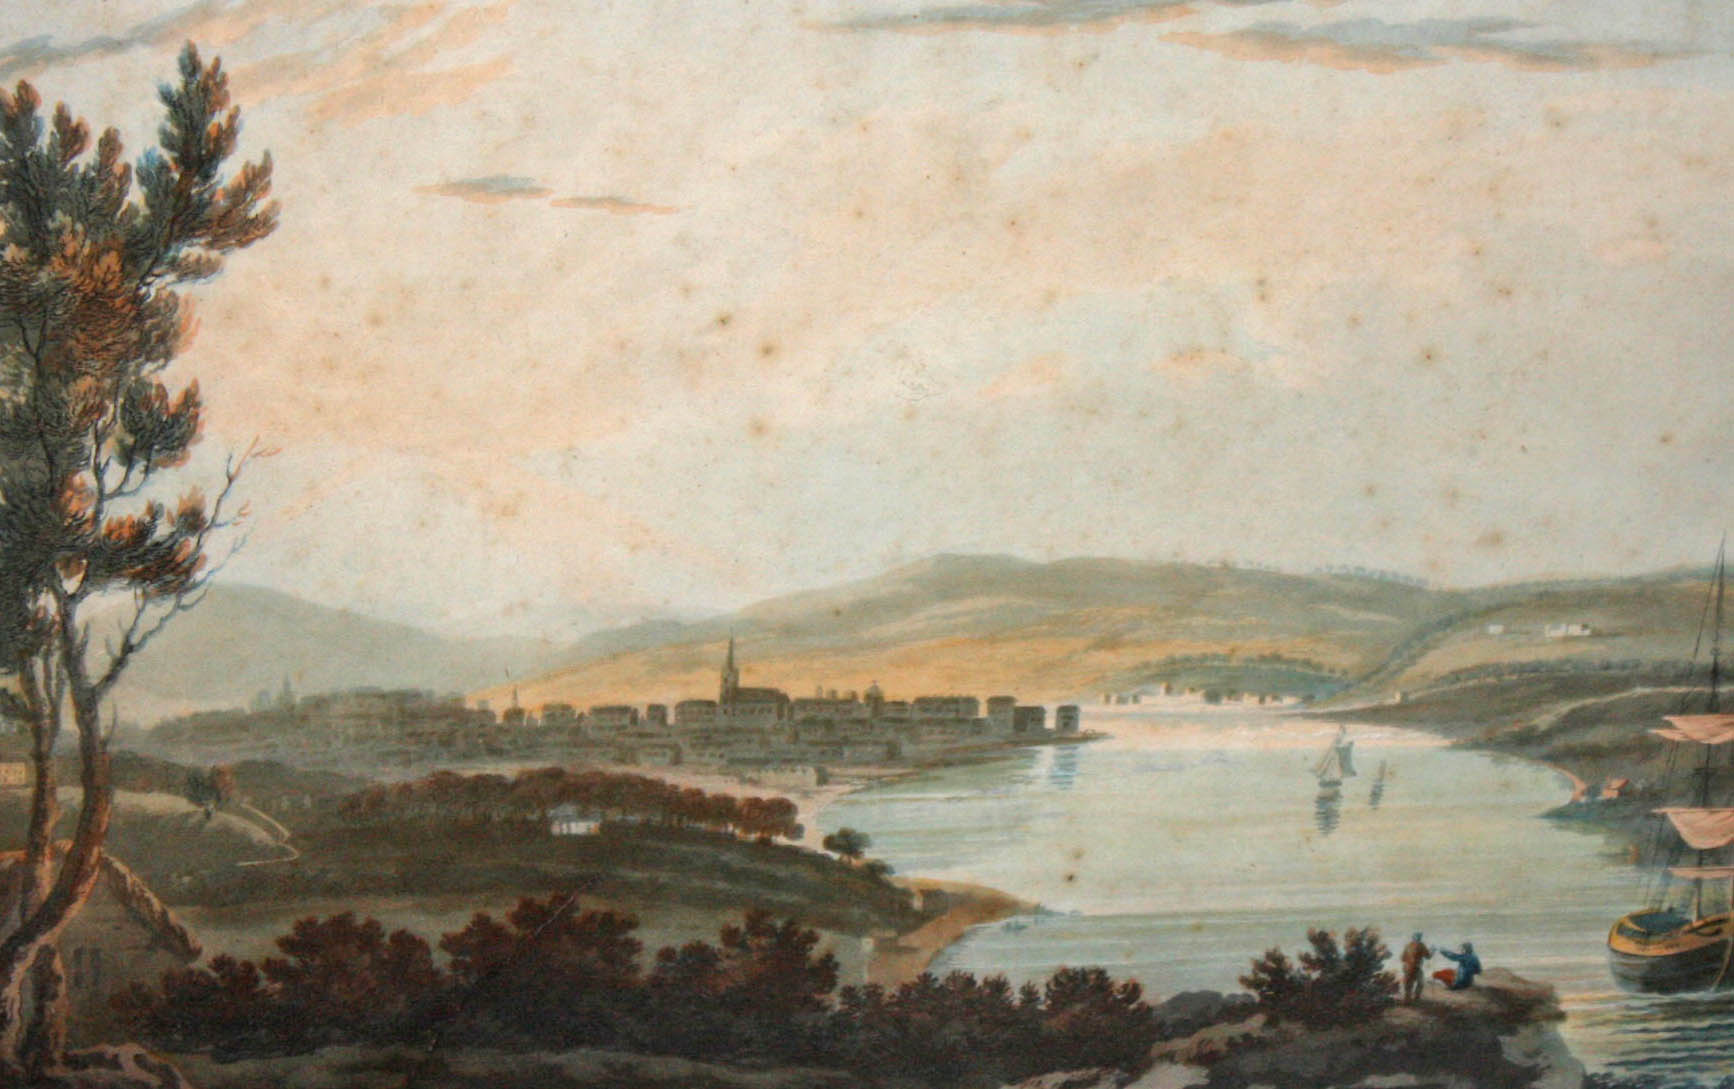 AFTER THOMAS S. ROBERTS, East View of the City of Waterford, a mesotint engraving by S.